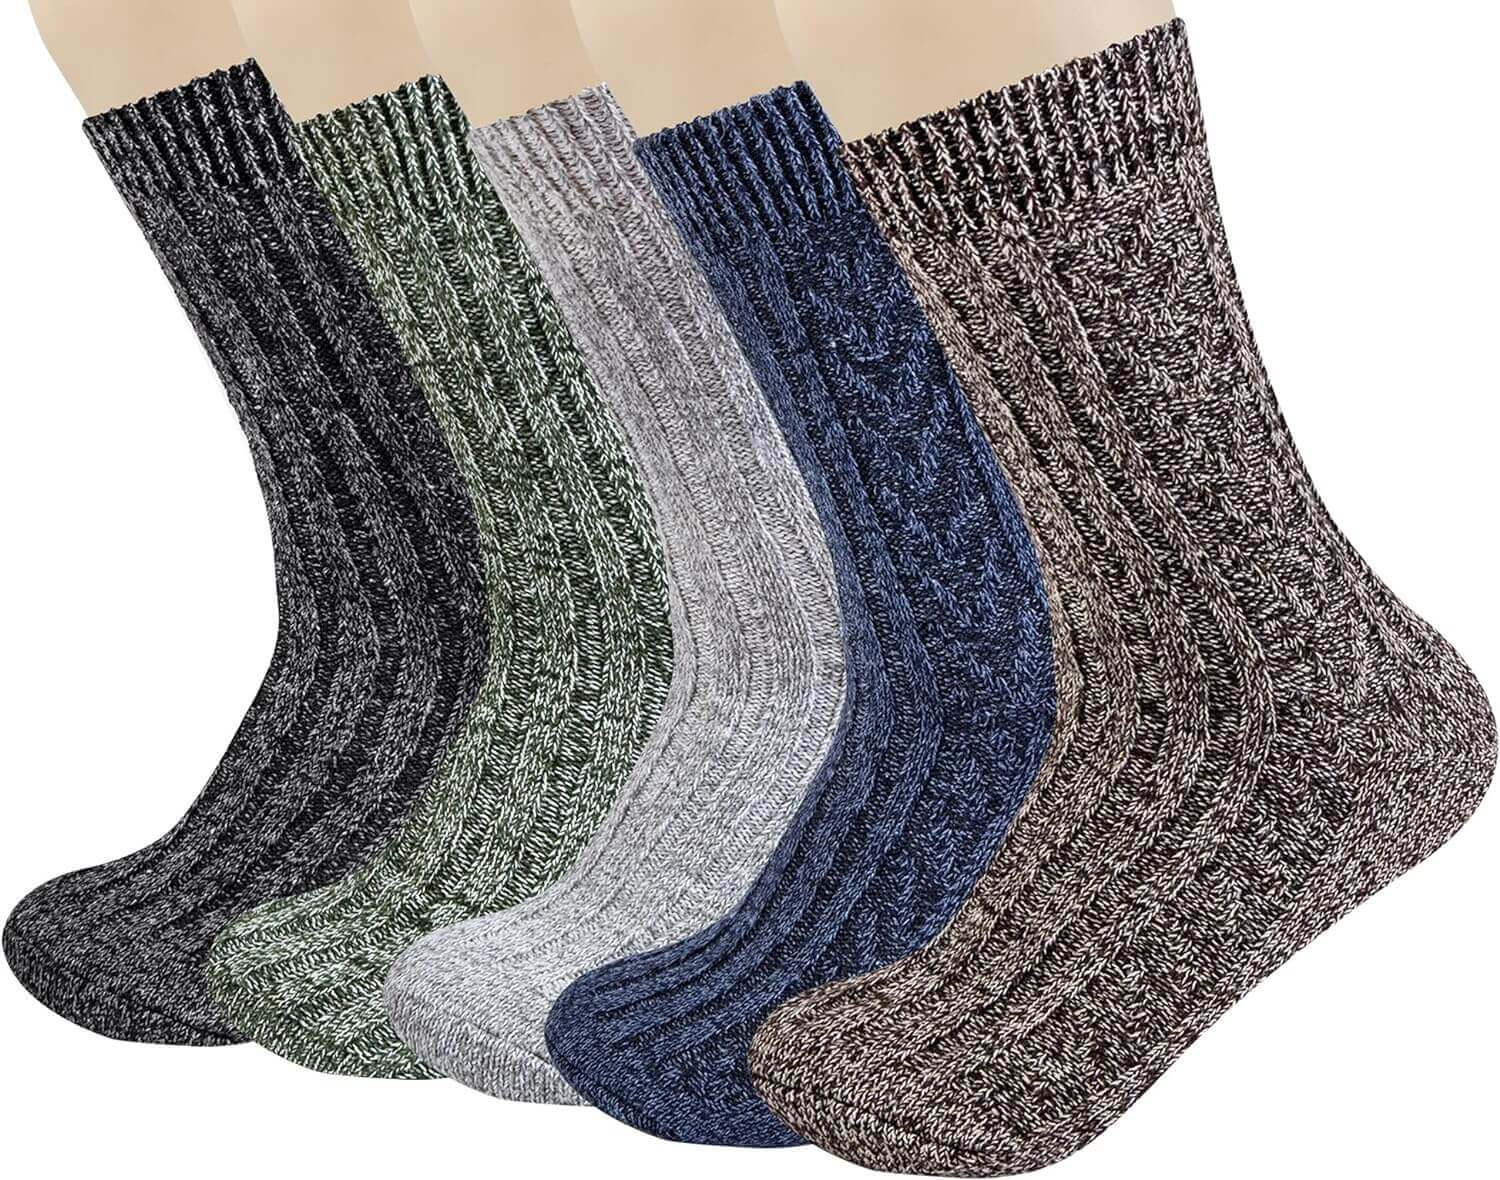 Shop The Latest >5 Pack Women's Thick Knit Wool Socks Winter Warm Socks > *Only $22.94*> From The Top Brand > *Senker Fashionl* > Shop Now and Get Free Shipping On Orders Over $45.00 >*Shop Earth Foot*